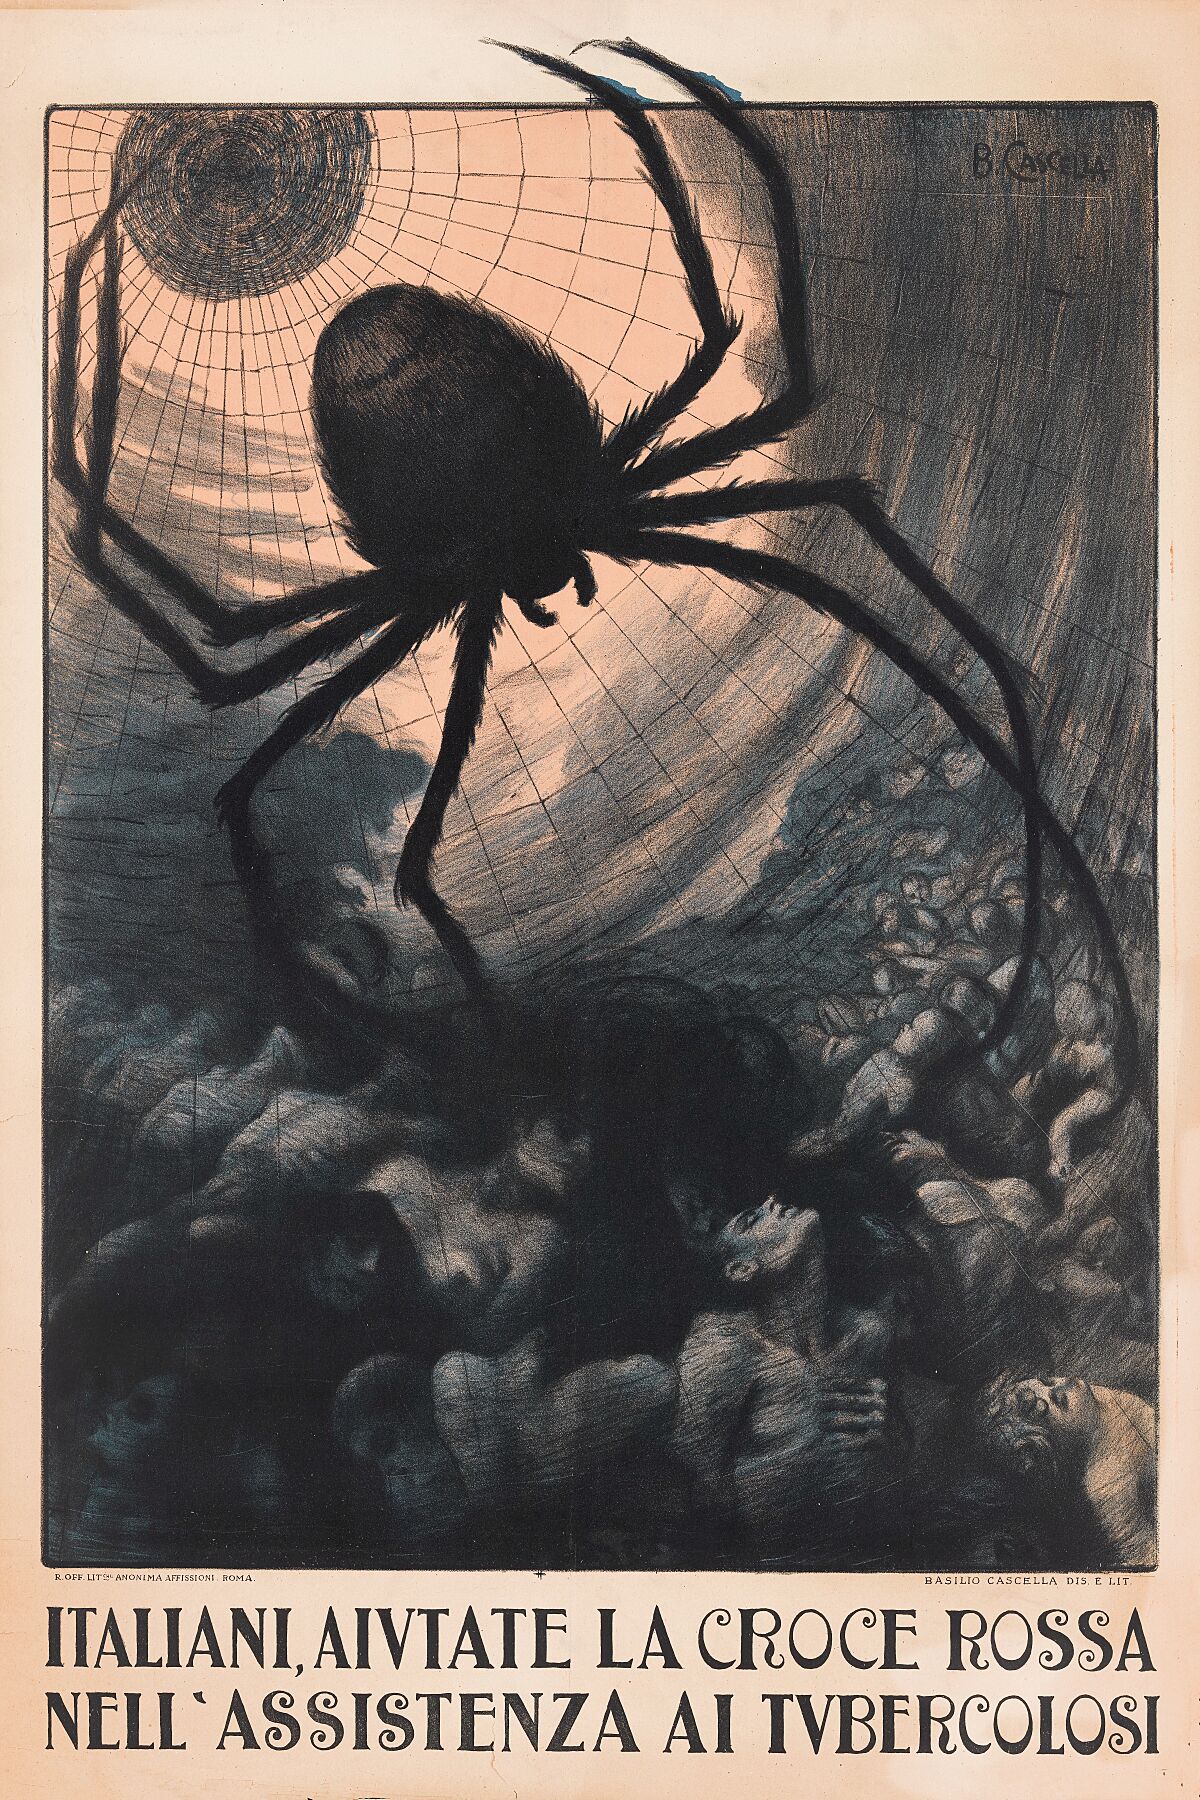 A giant spider catching crowds of humans in its web; representing tuberculosis. Colour lithograph by B. Cascella, ca. 1920.